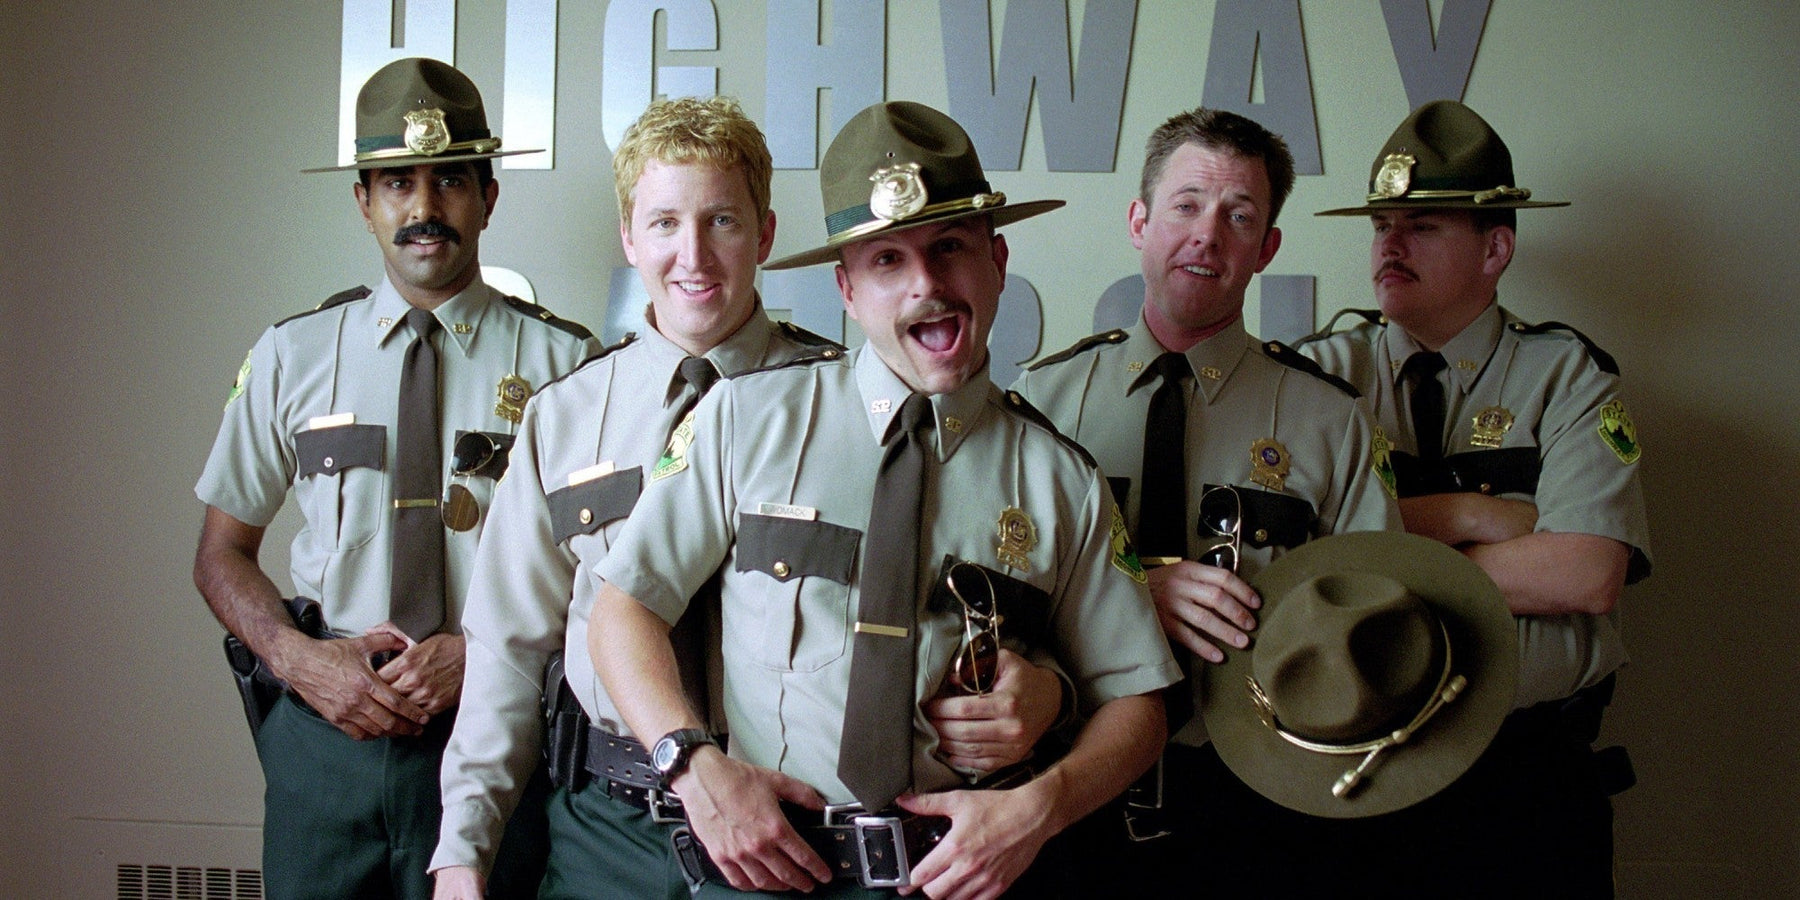 These are the 10 Best Quotes from "Super Troopers"